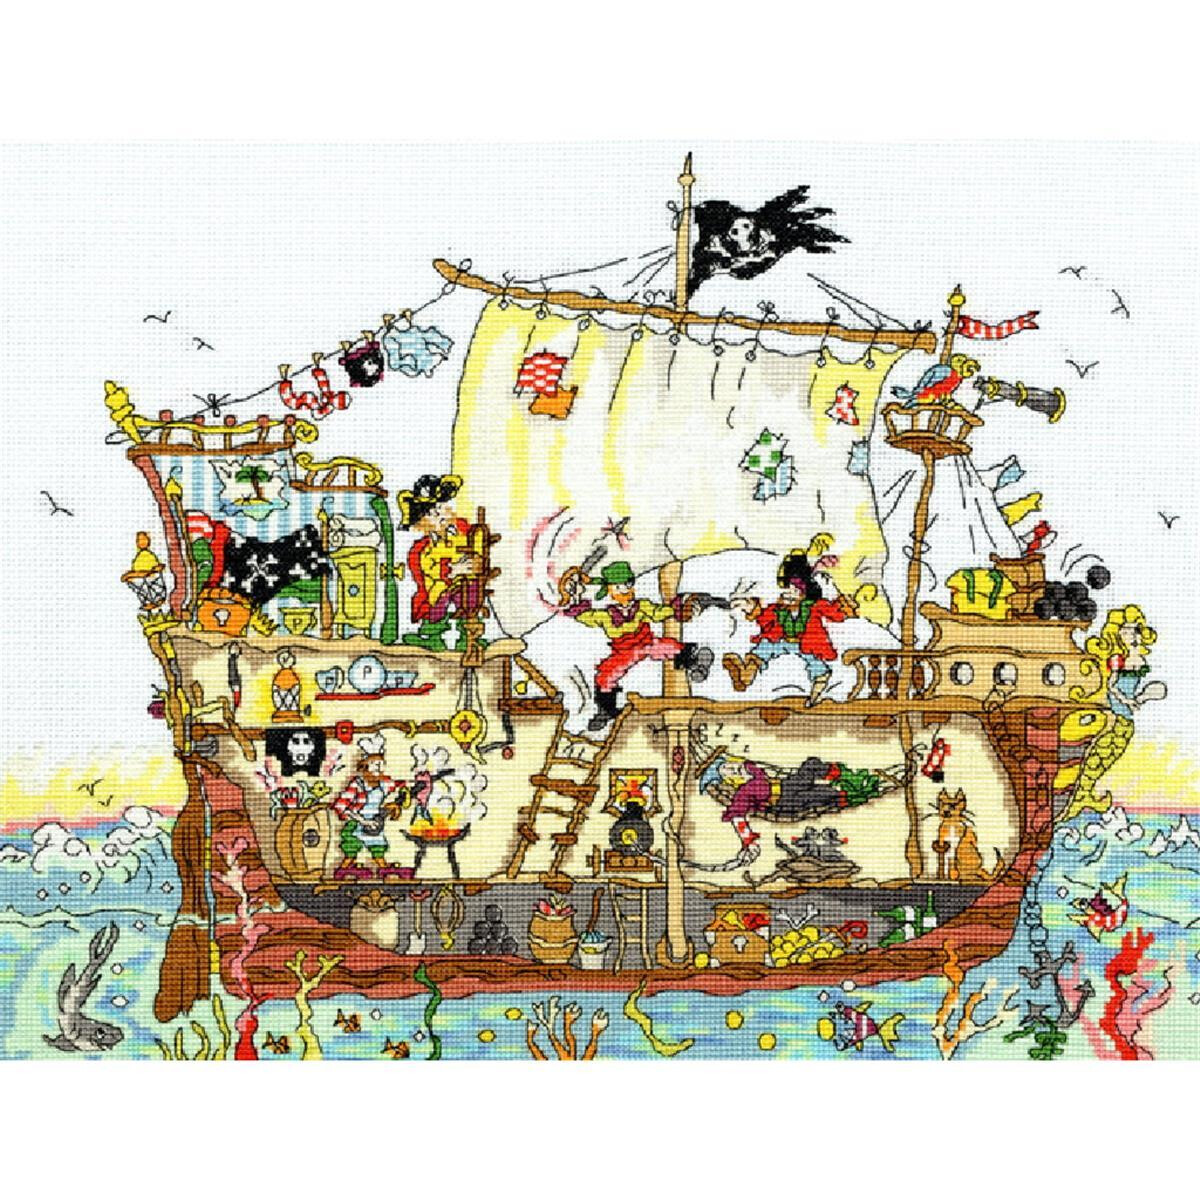 Illustrated pirate ship at sea with various playful,...